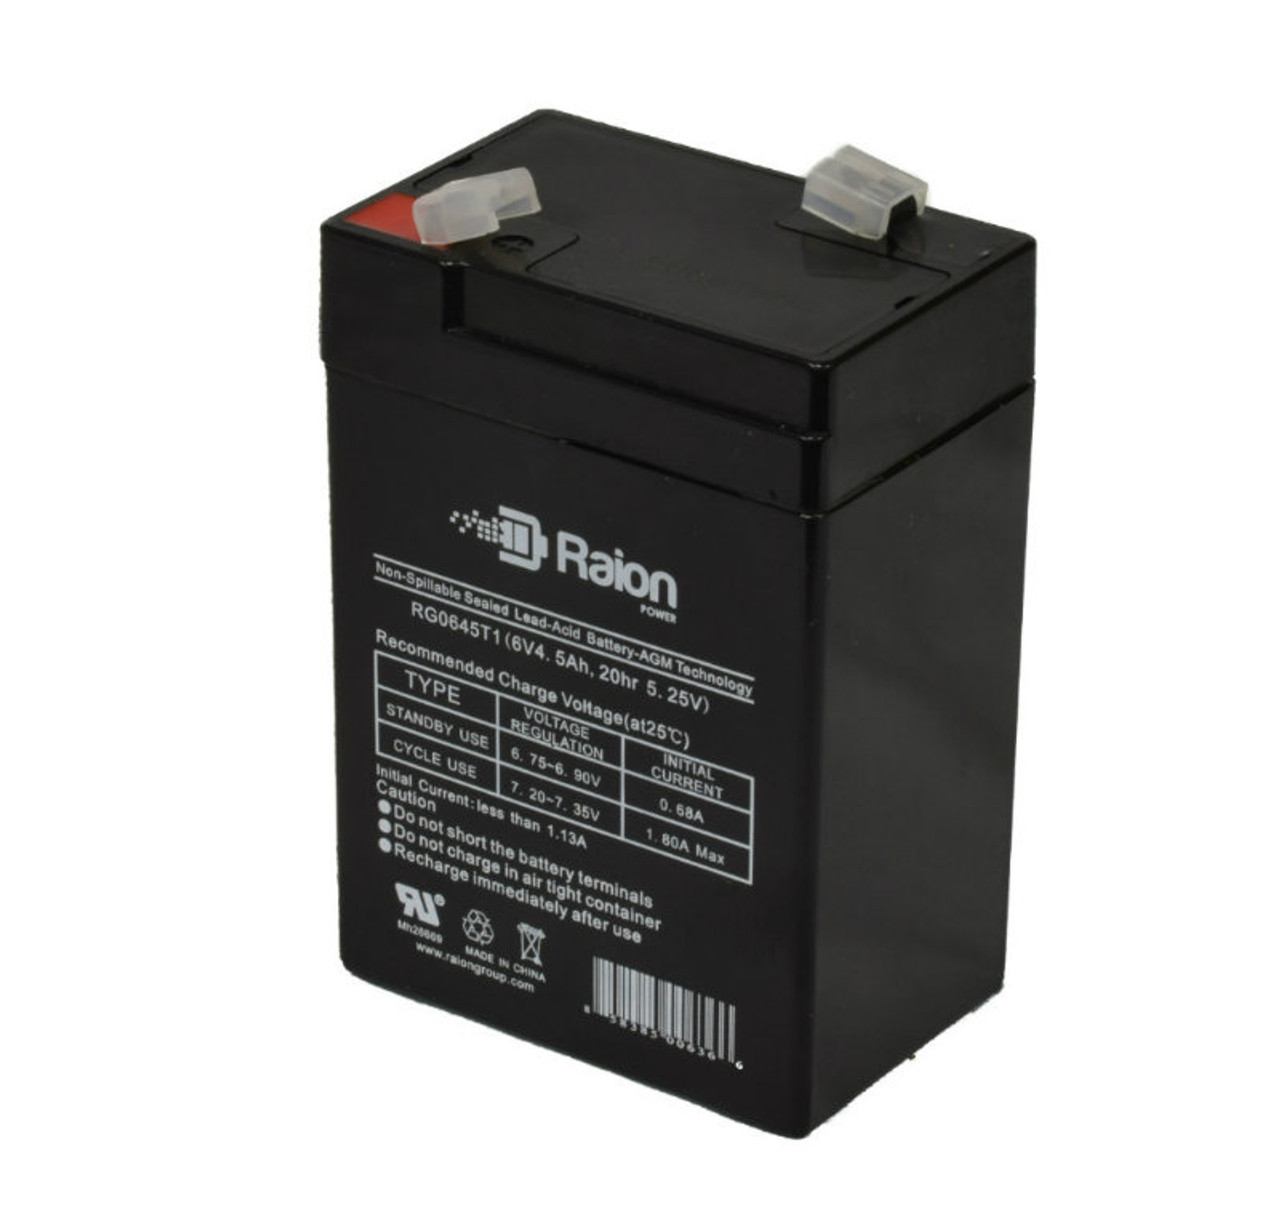 Raion Power RG0645T1 6V 4.5Ah Replacement Battery Cartridge for Vision CP656